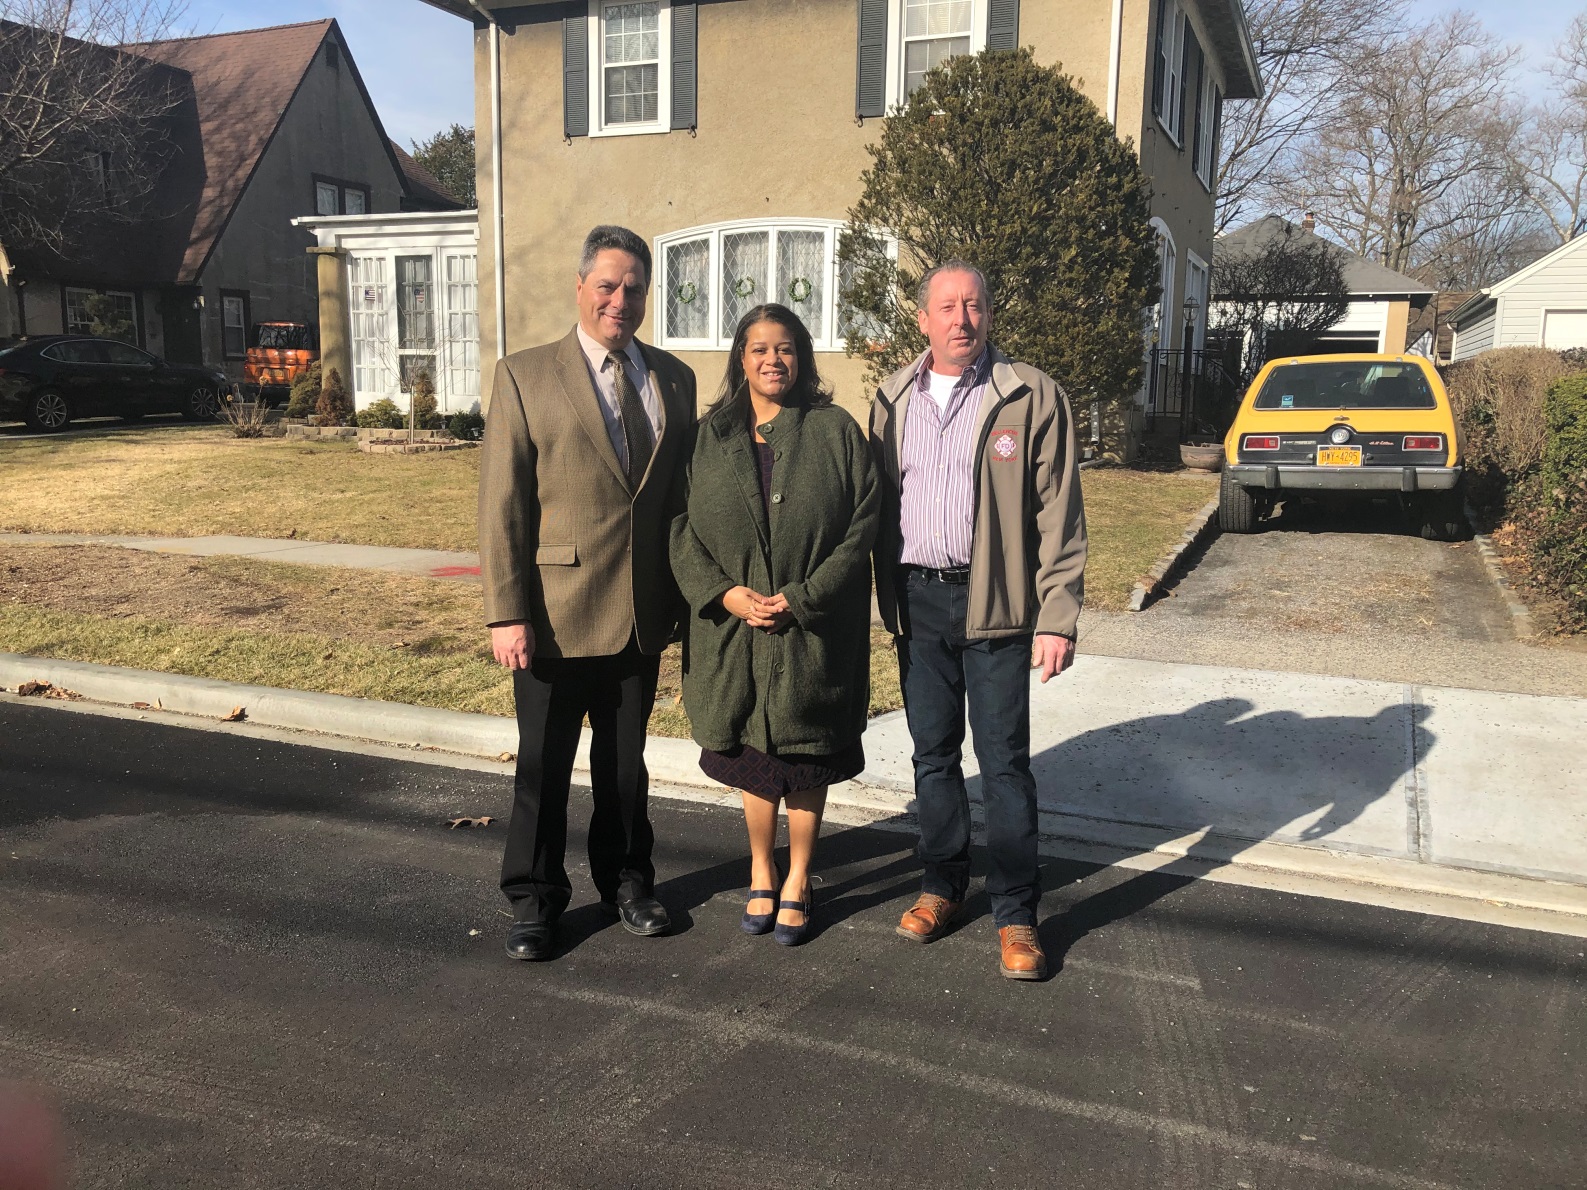 Bellerose Village Mayor Kenneth Moore & Deputy Mayor Joseph Juliano meet with Assemblywoman Michaelle Solages in the field at the 2019 Road Project Site. (L-R: Deputy Mayor Joe Juliano, Assemblywoman Michaelle Solages and Mayor Ken Moore)